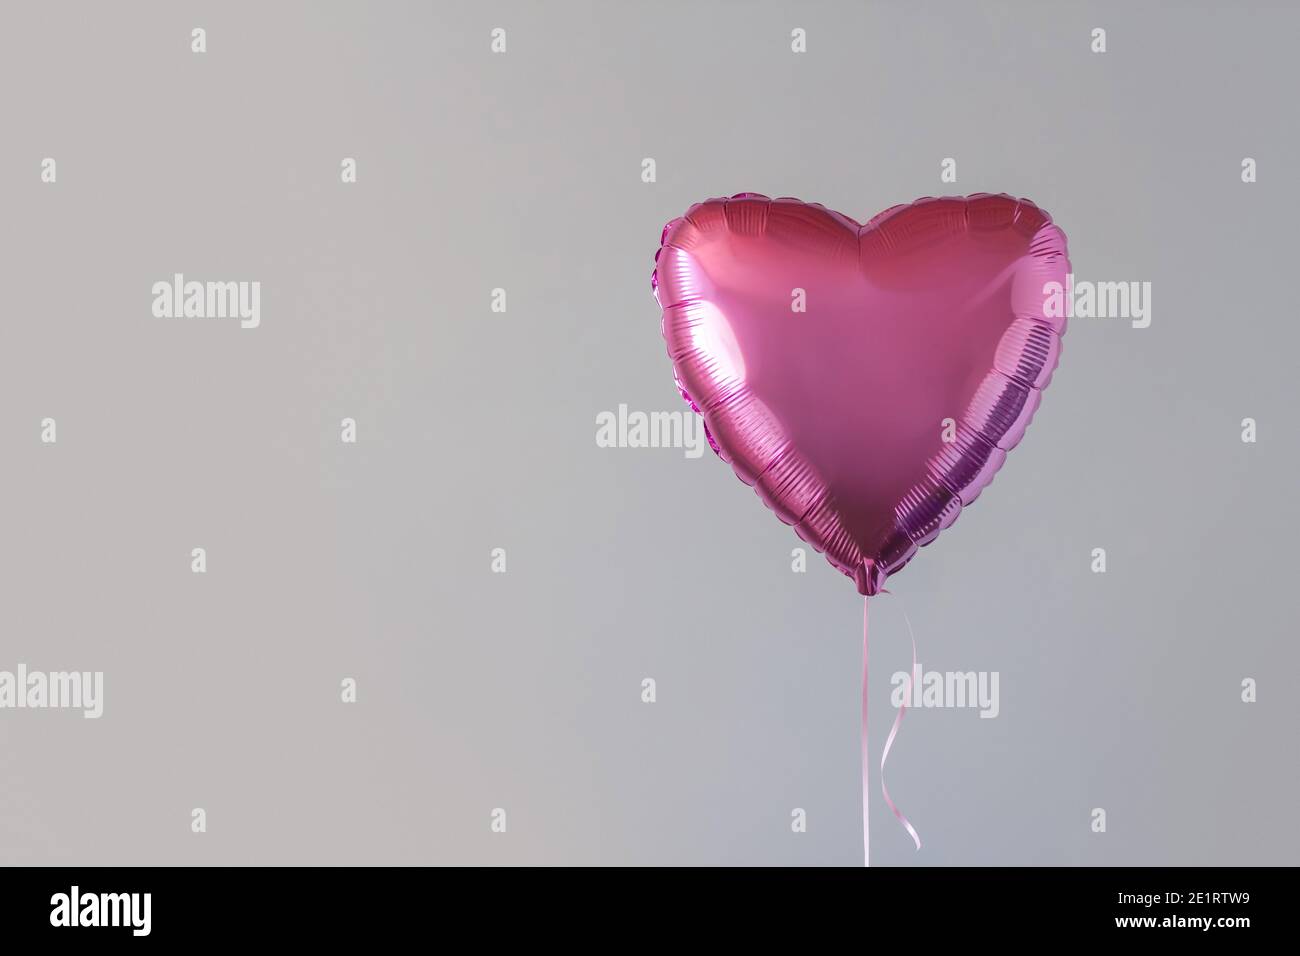 Pink balloon in the form of a heart against the background of a gray wall copy space. Stock Photo